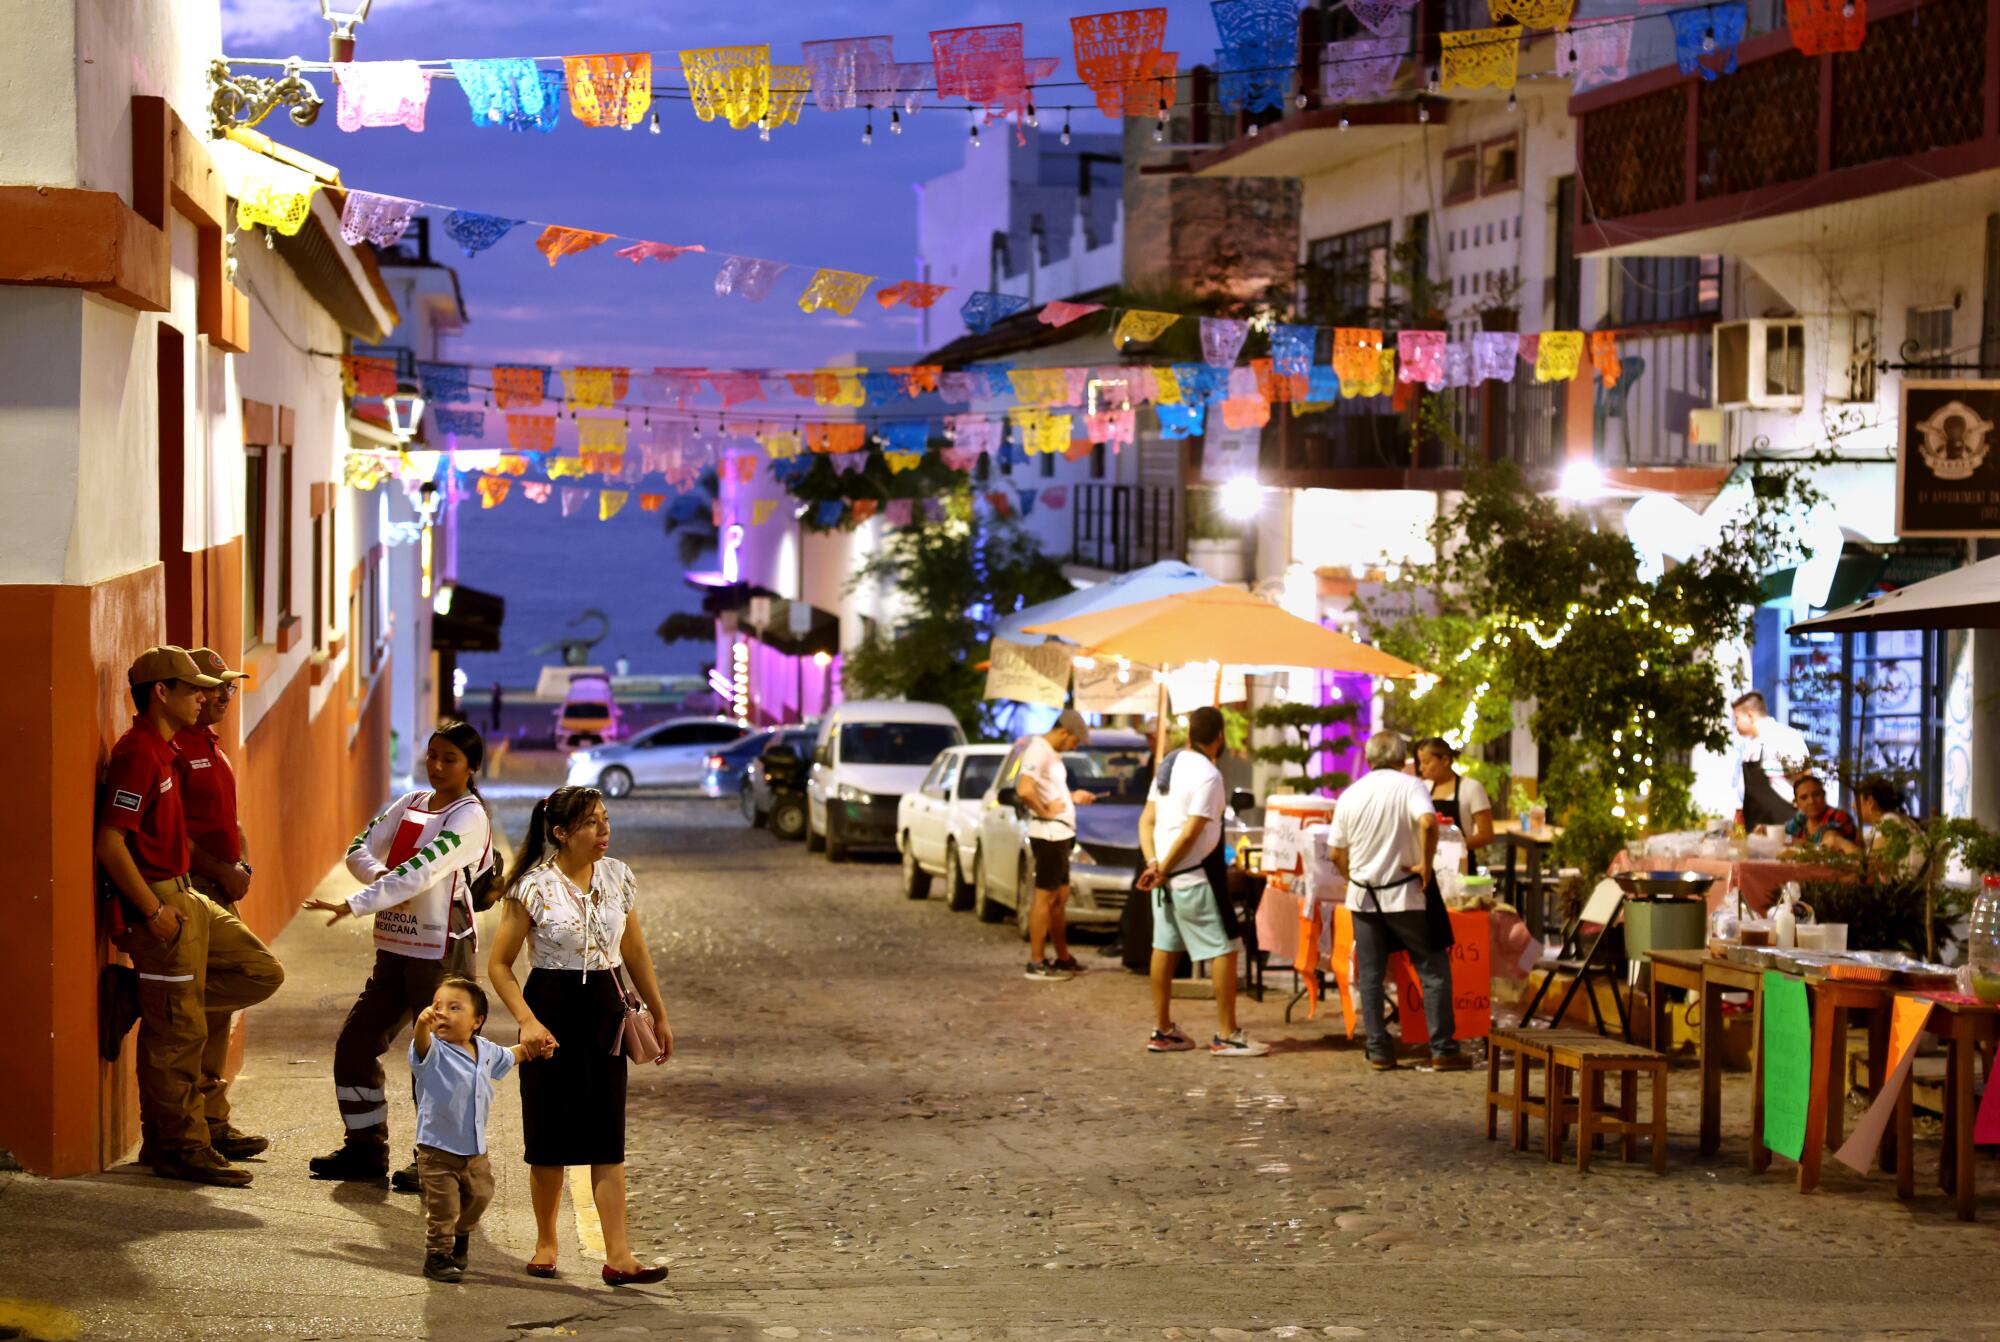 People linger, walk and dine along a dirt street decorated with banners in several colors strung overhead